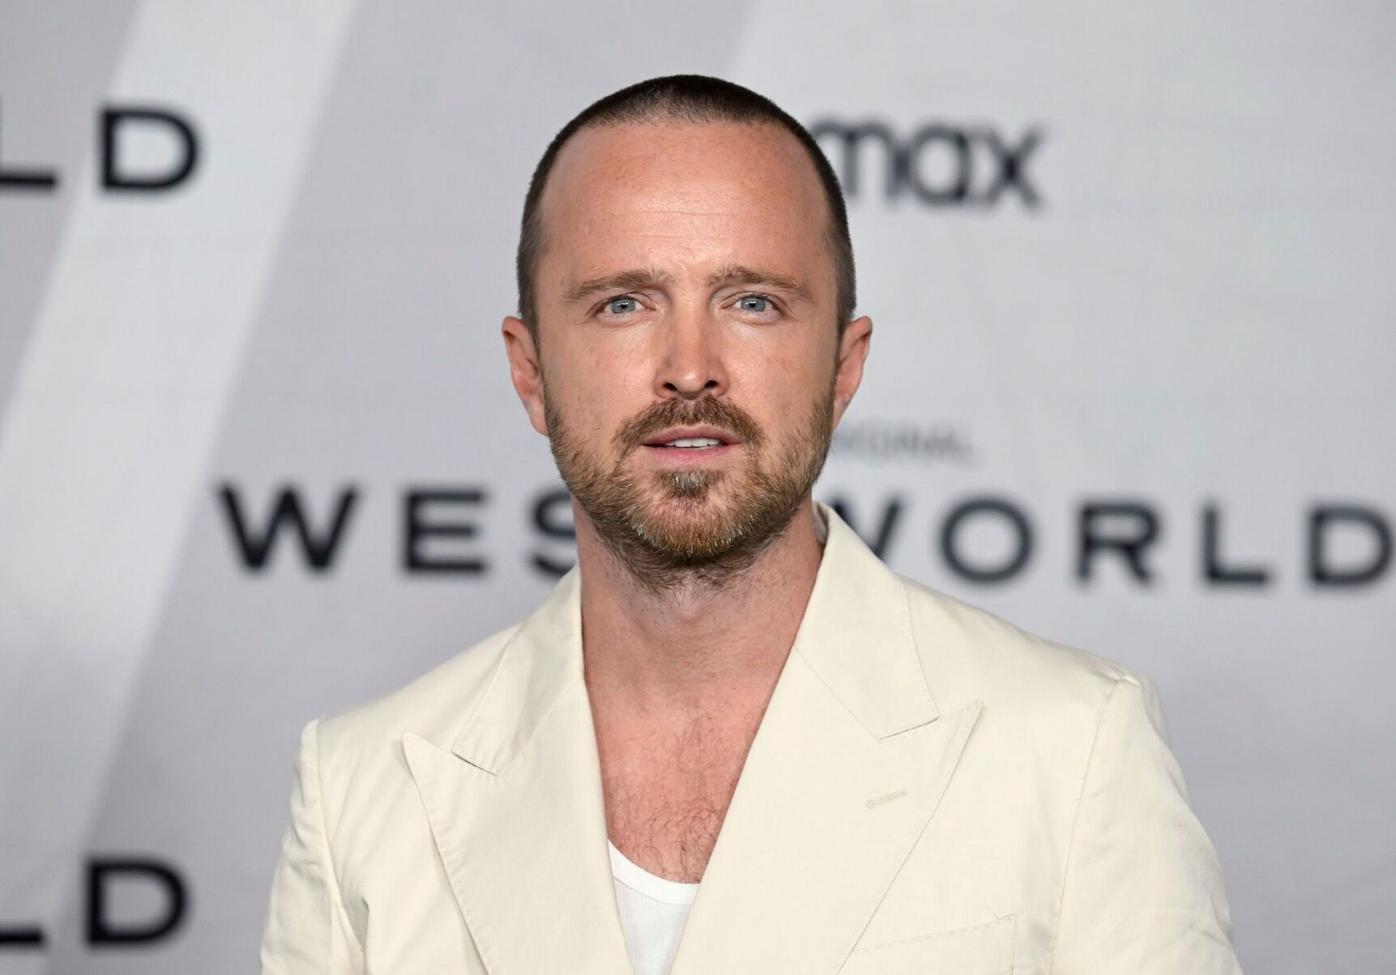 Aaron Paul and Bryan Cranston Take a Stand: Why Netflix Isn't Paying Them for Breaking Bad and What It Means for Streaming